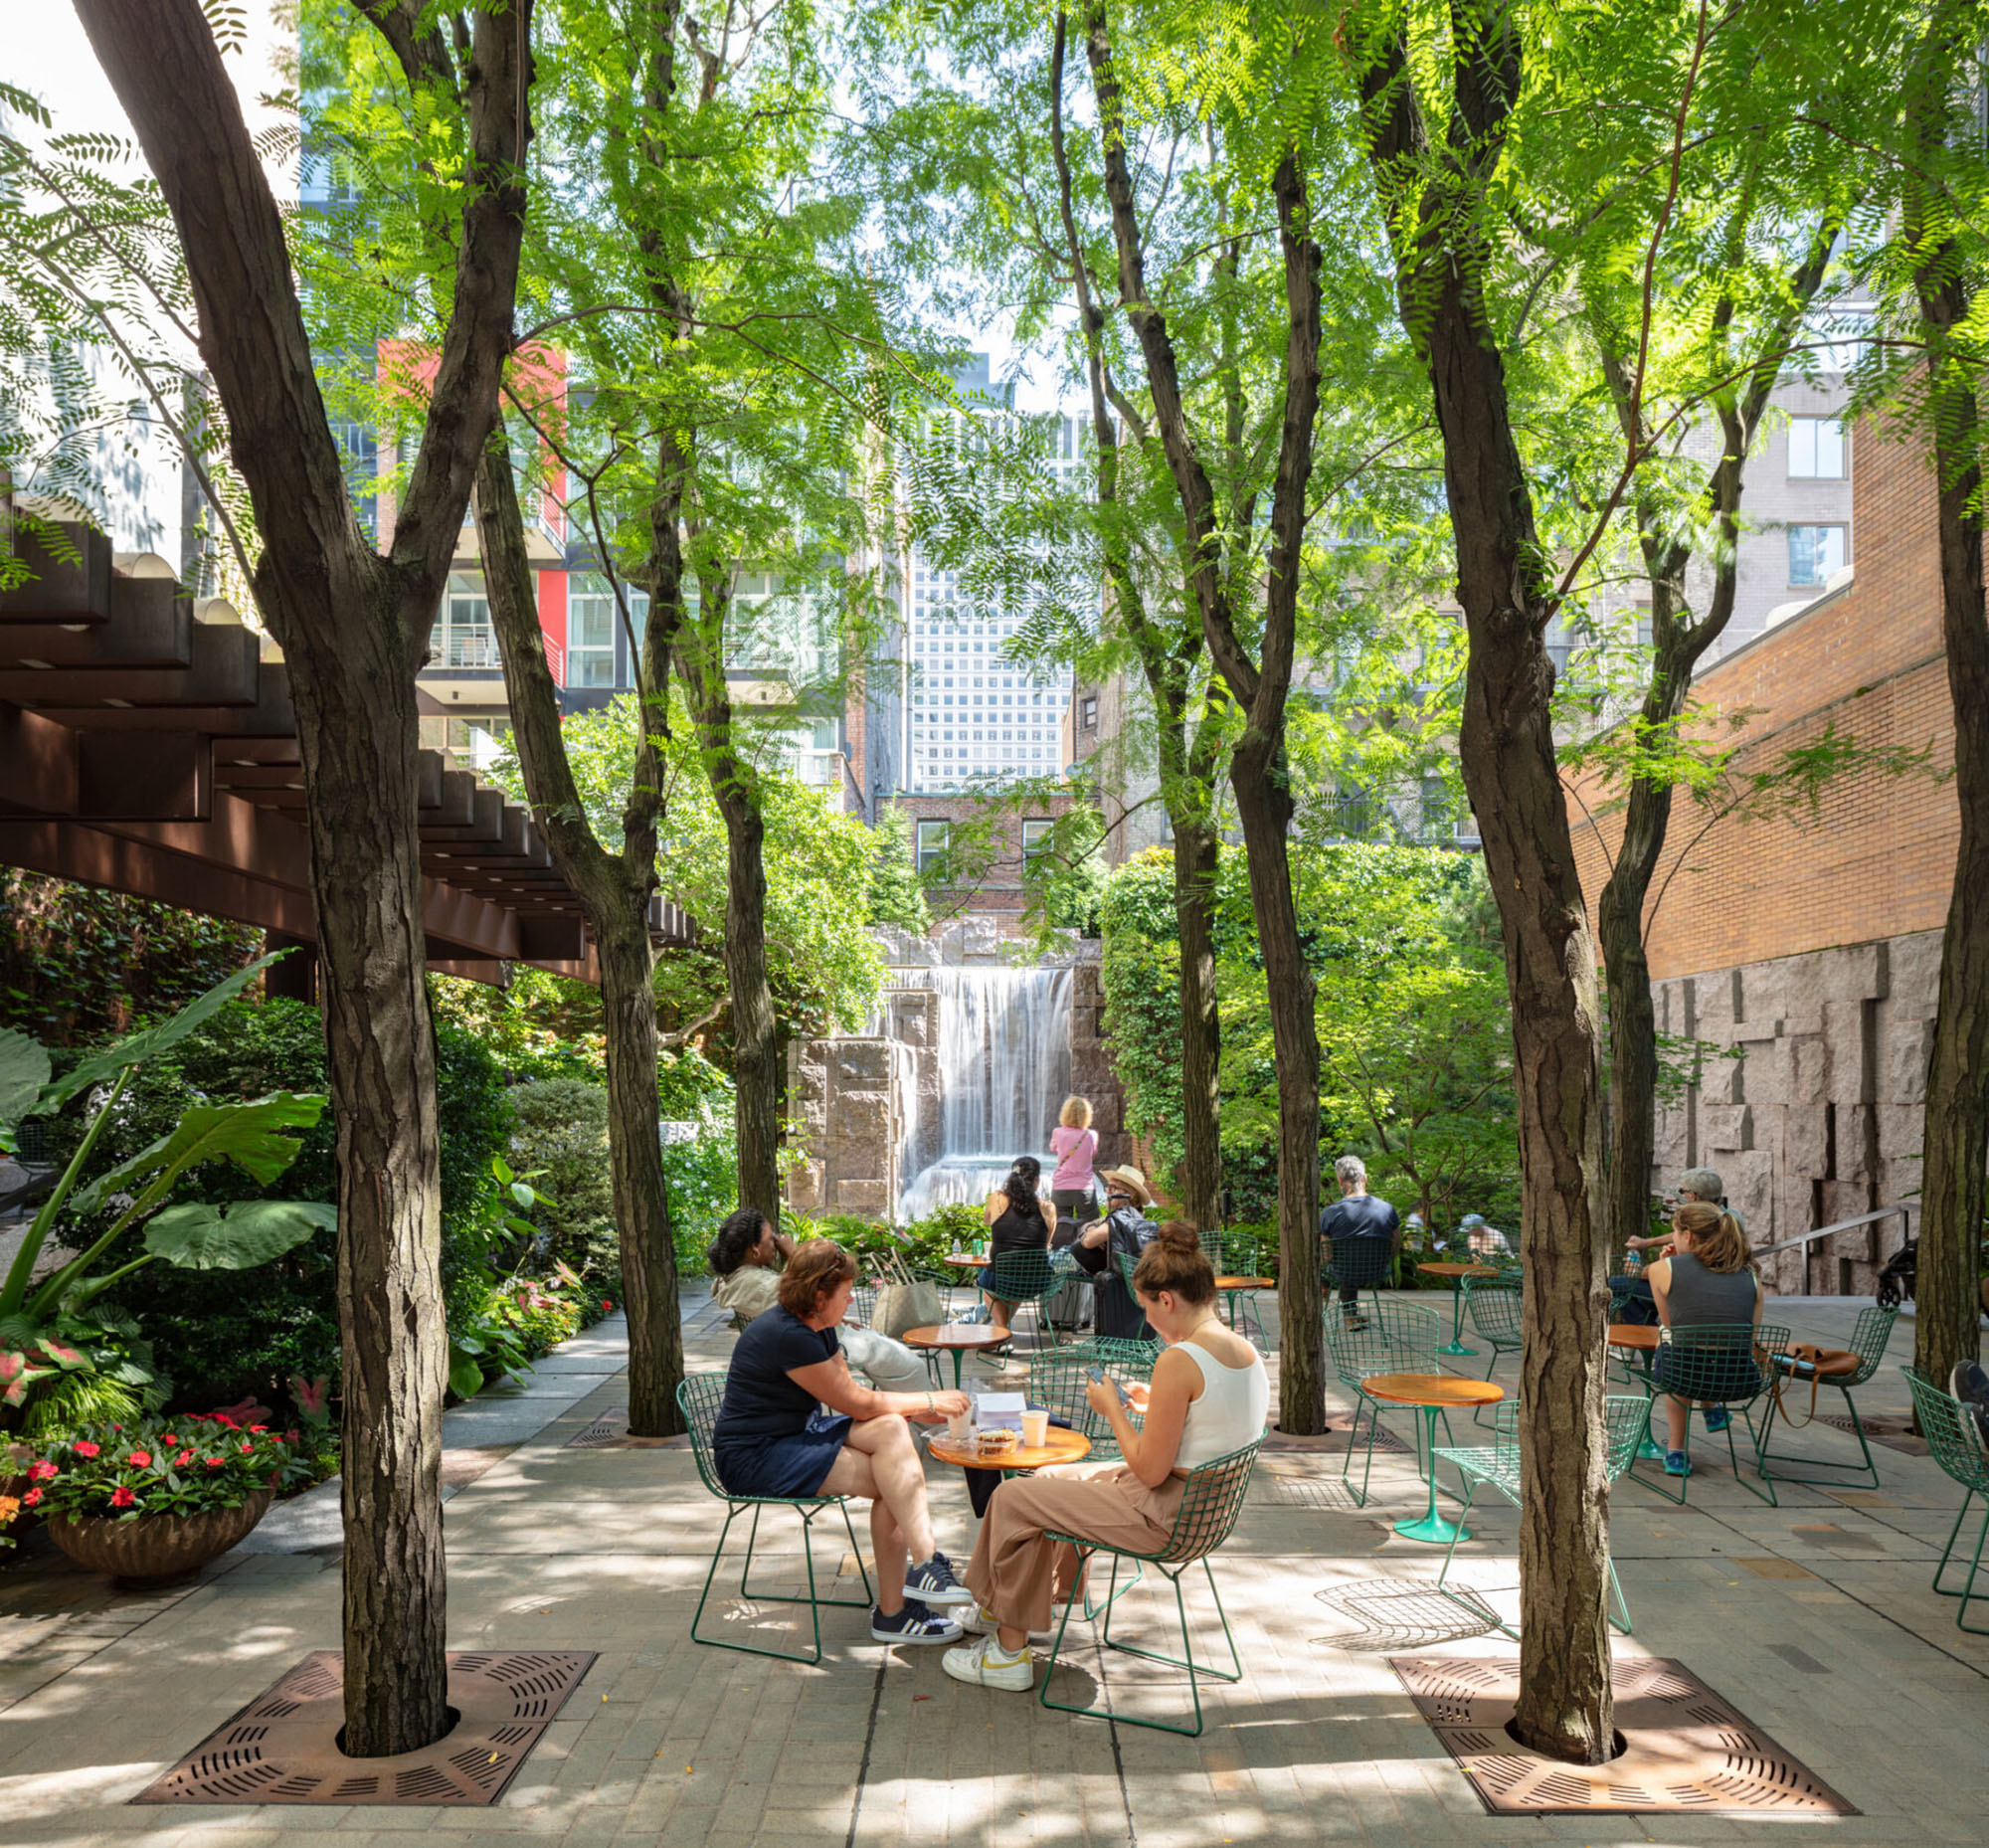 New Yorkers sitting at tables and chairs beneath a lush tree canopy with dappled light and a waterfall in the background